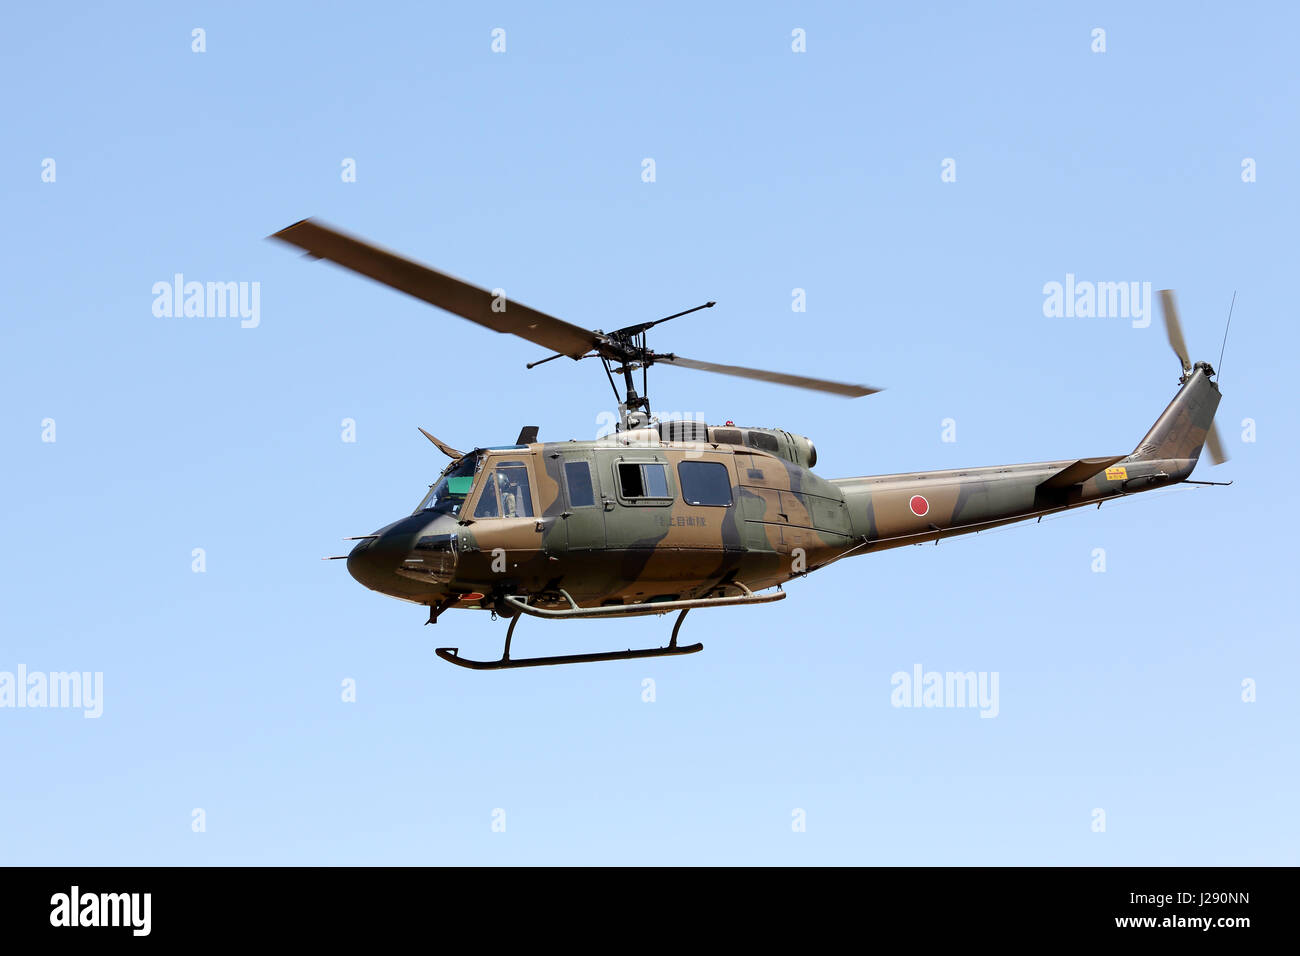 Japanese military helicopter in flight , Military helicopter flying Stock Photo